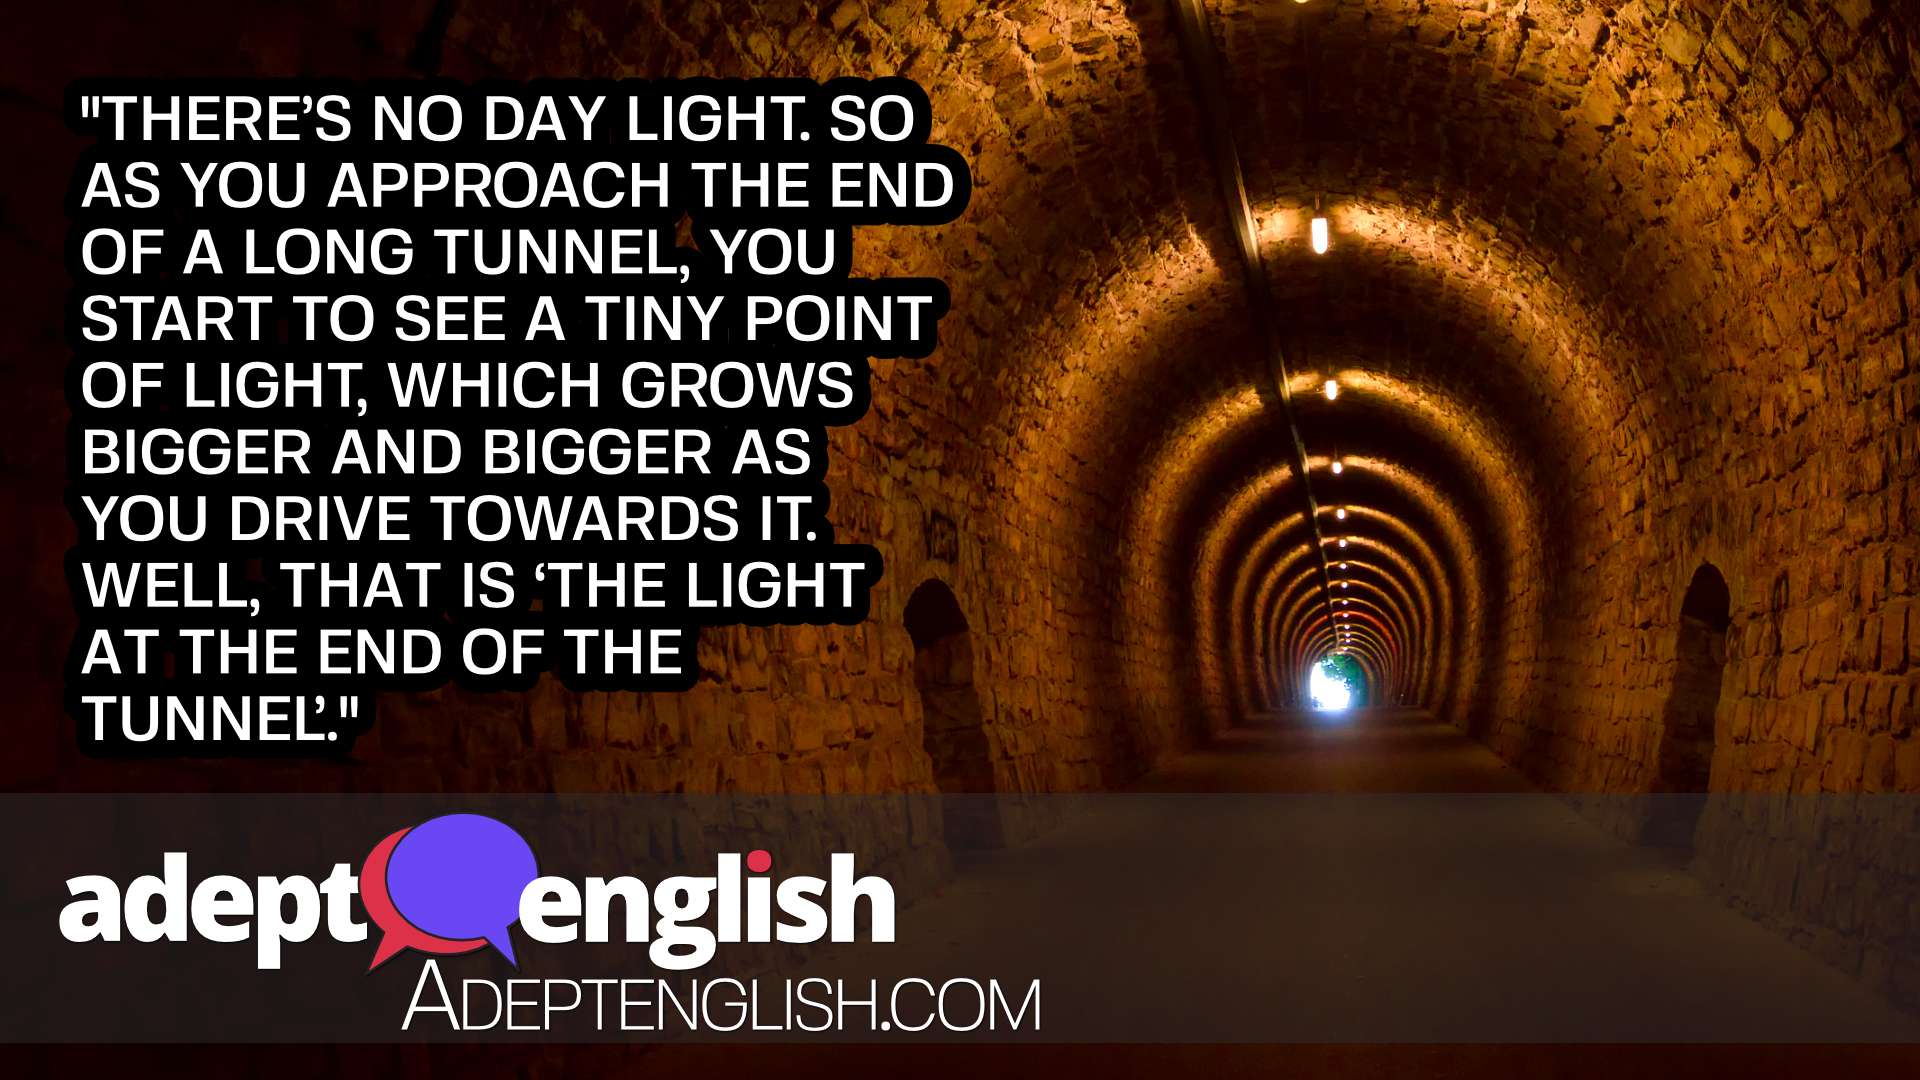 A photograph of a long underground tunnel with stone walls and in the distance a bright tunnel exit into the daylight beyond. Used to help explain the English language idiom of light at the end of the tunnel.